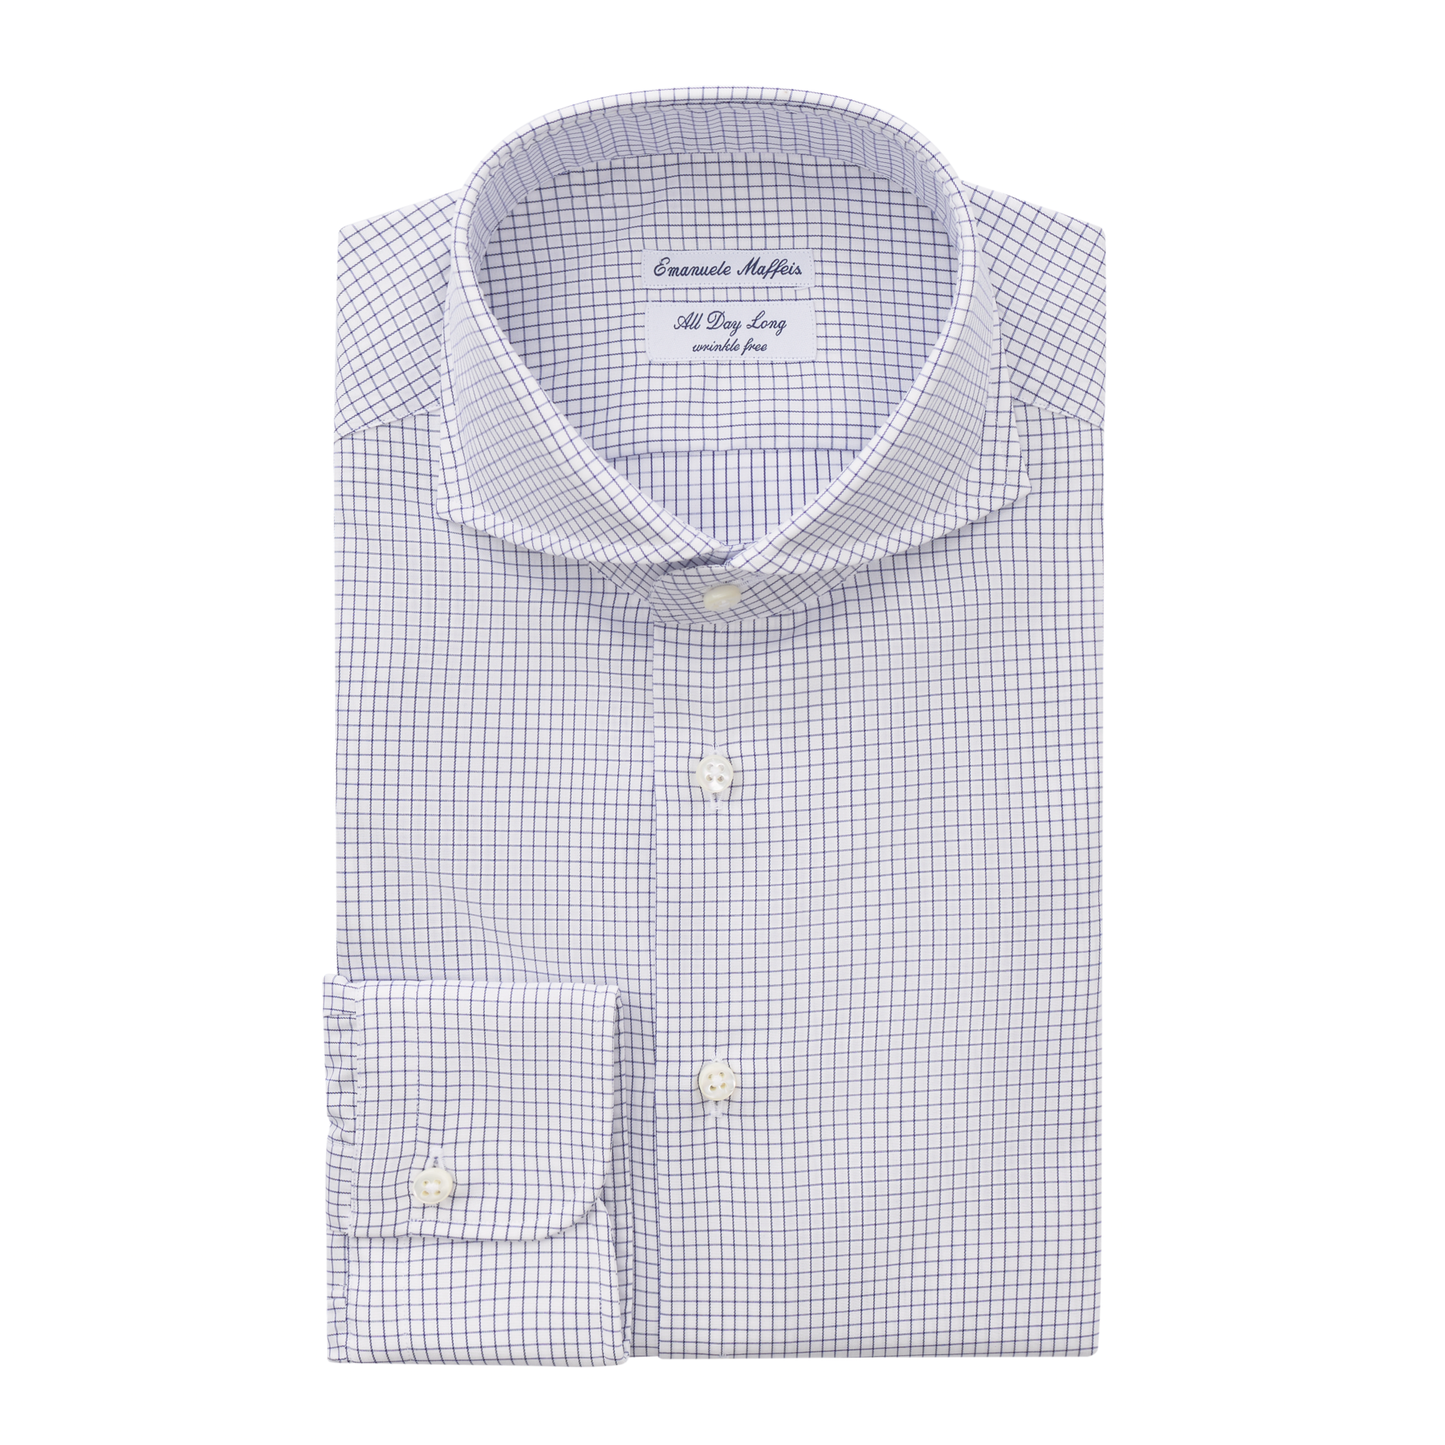 Emanuele Maffeis "All Day Long Collection" Checked Cotton Shirt - SARTALE